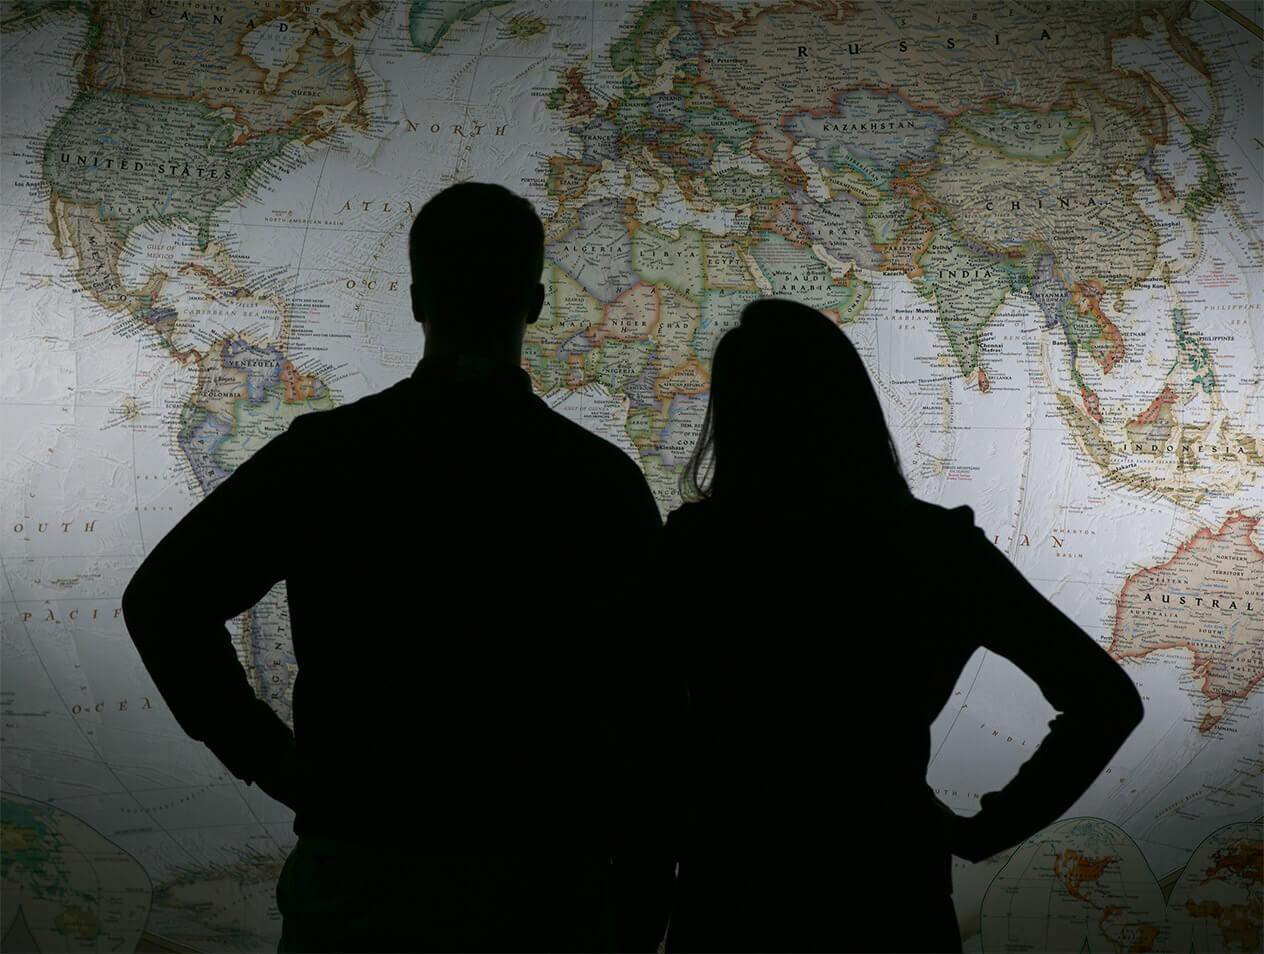 A man and a woman silhouetted in front of a world map